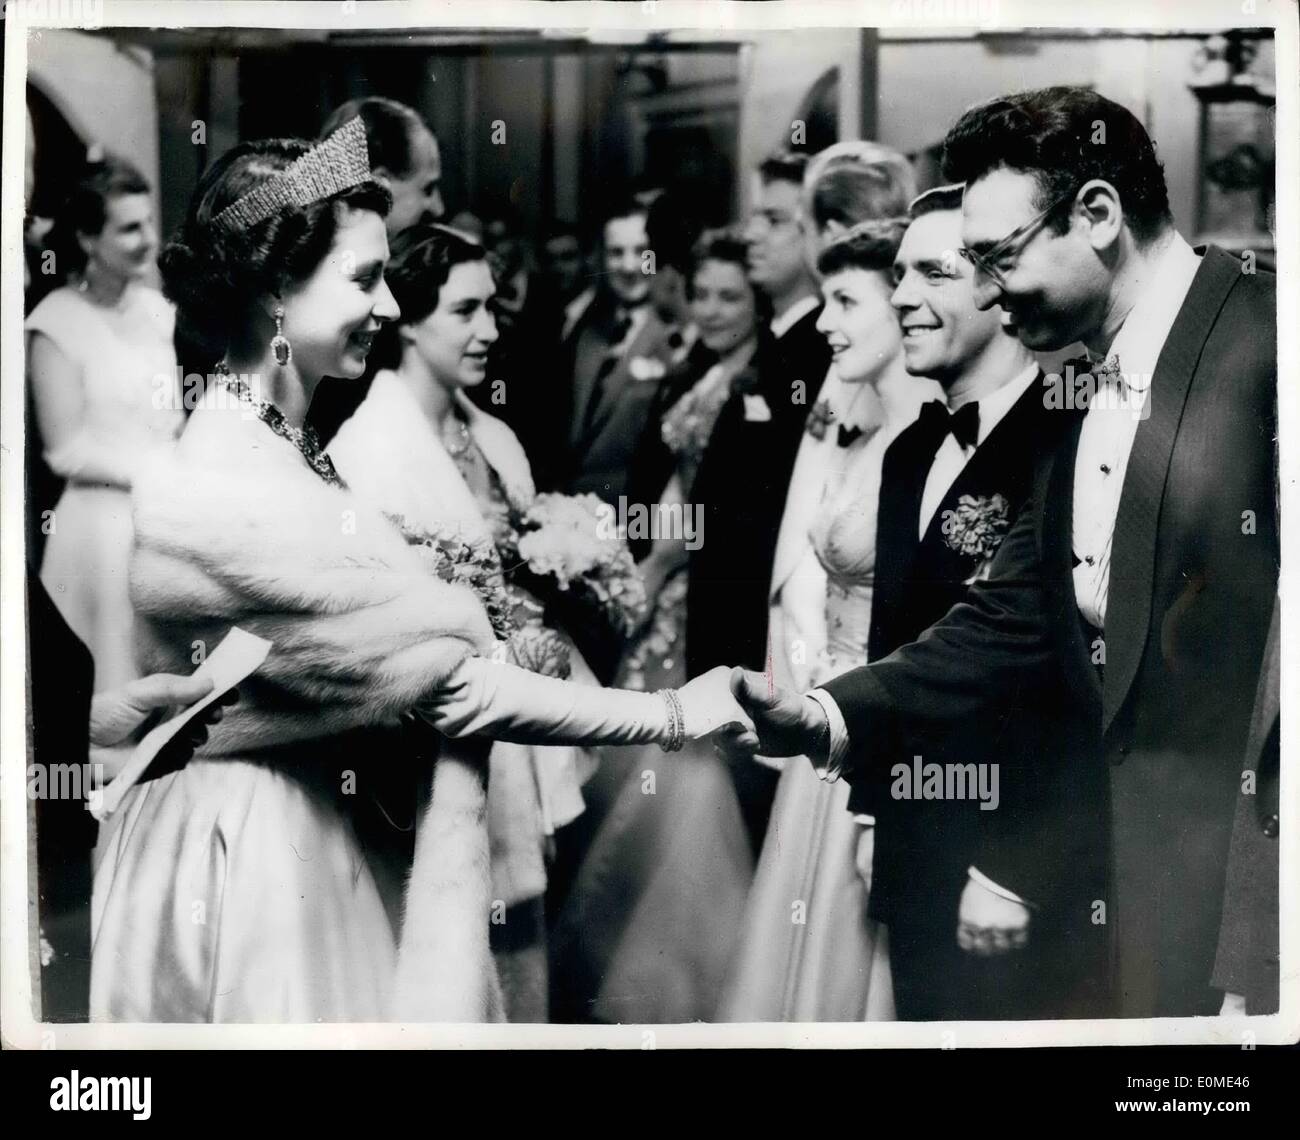 Nov. 11, 1954 - Royal variety performance at London Palladium. Queen with Frankie Laine. Photo shows Queen shakes hands with Frankie Laine - next to whim is Norman Wisdom.. Princess Margaret looks on- at the Palladium. Stock Photo